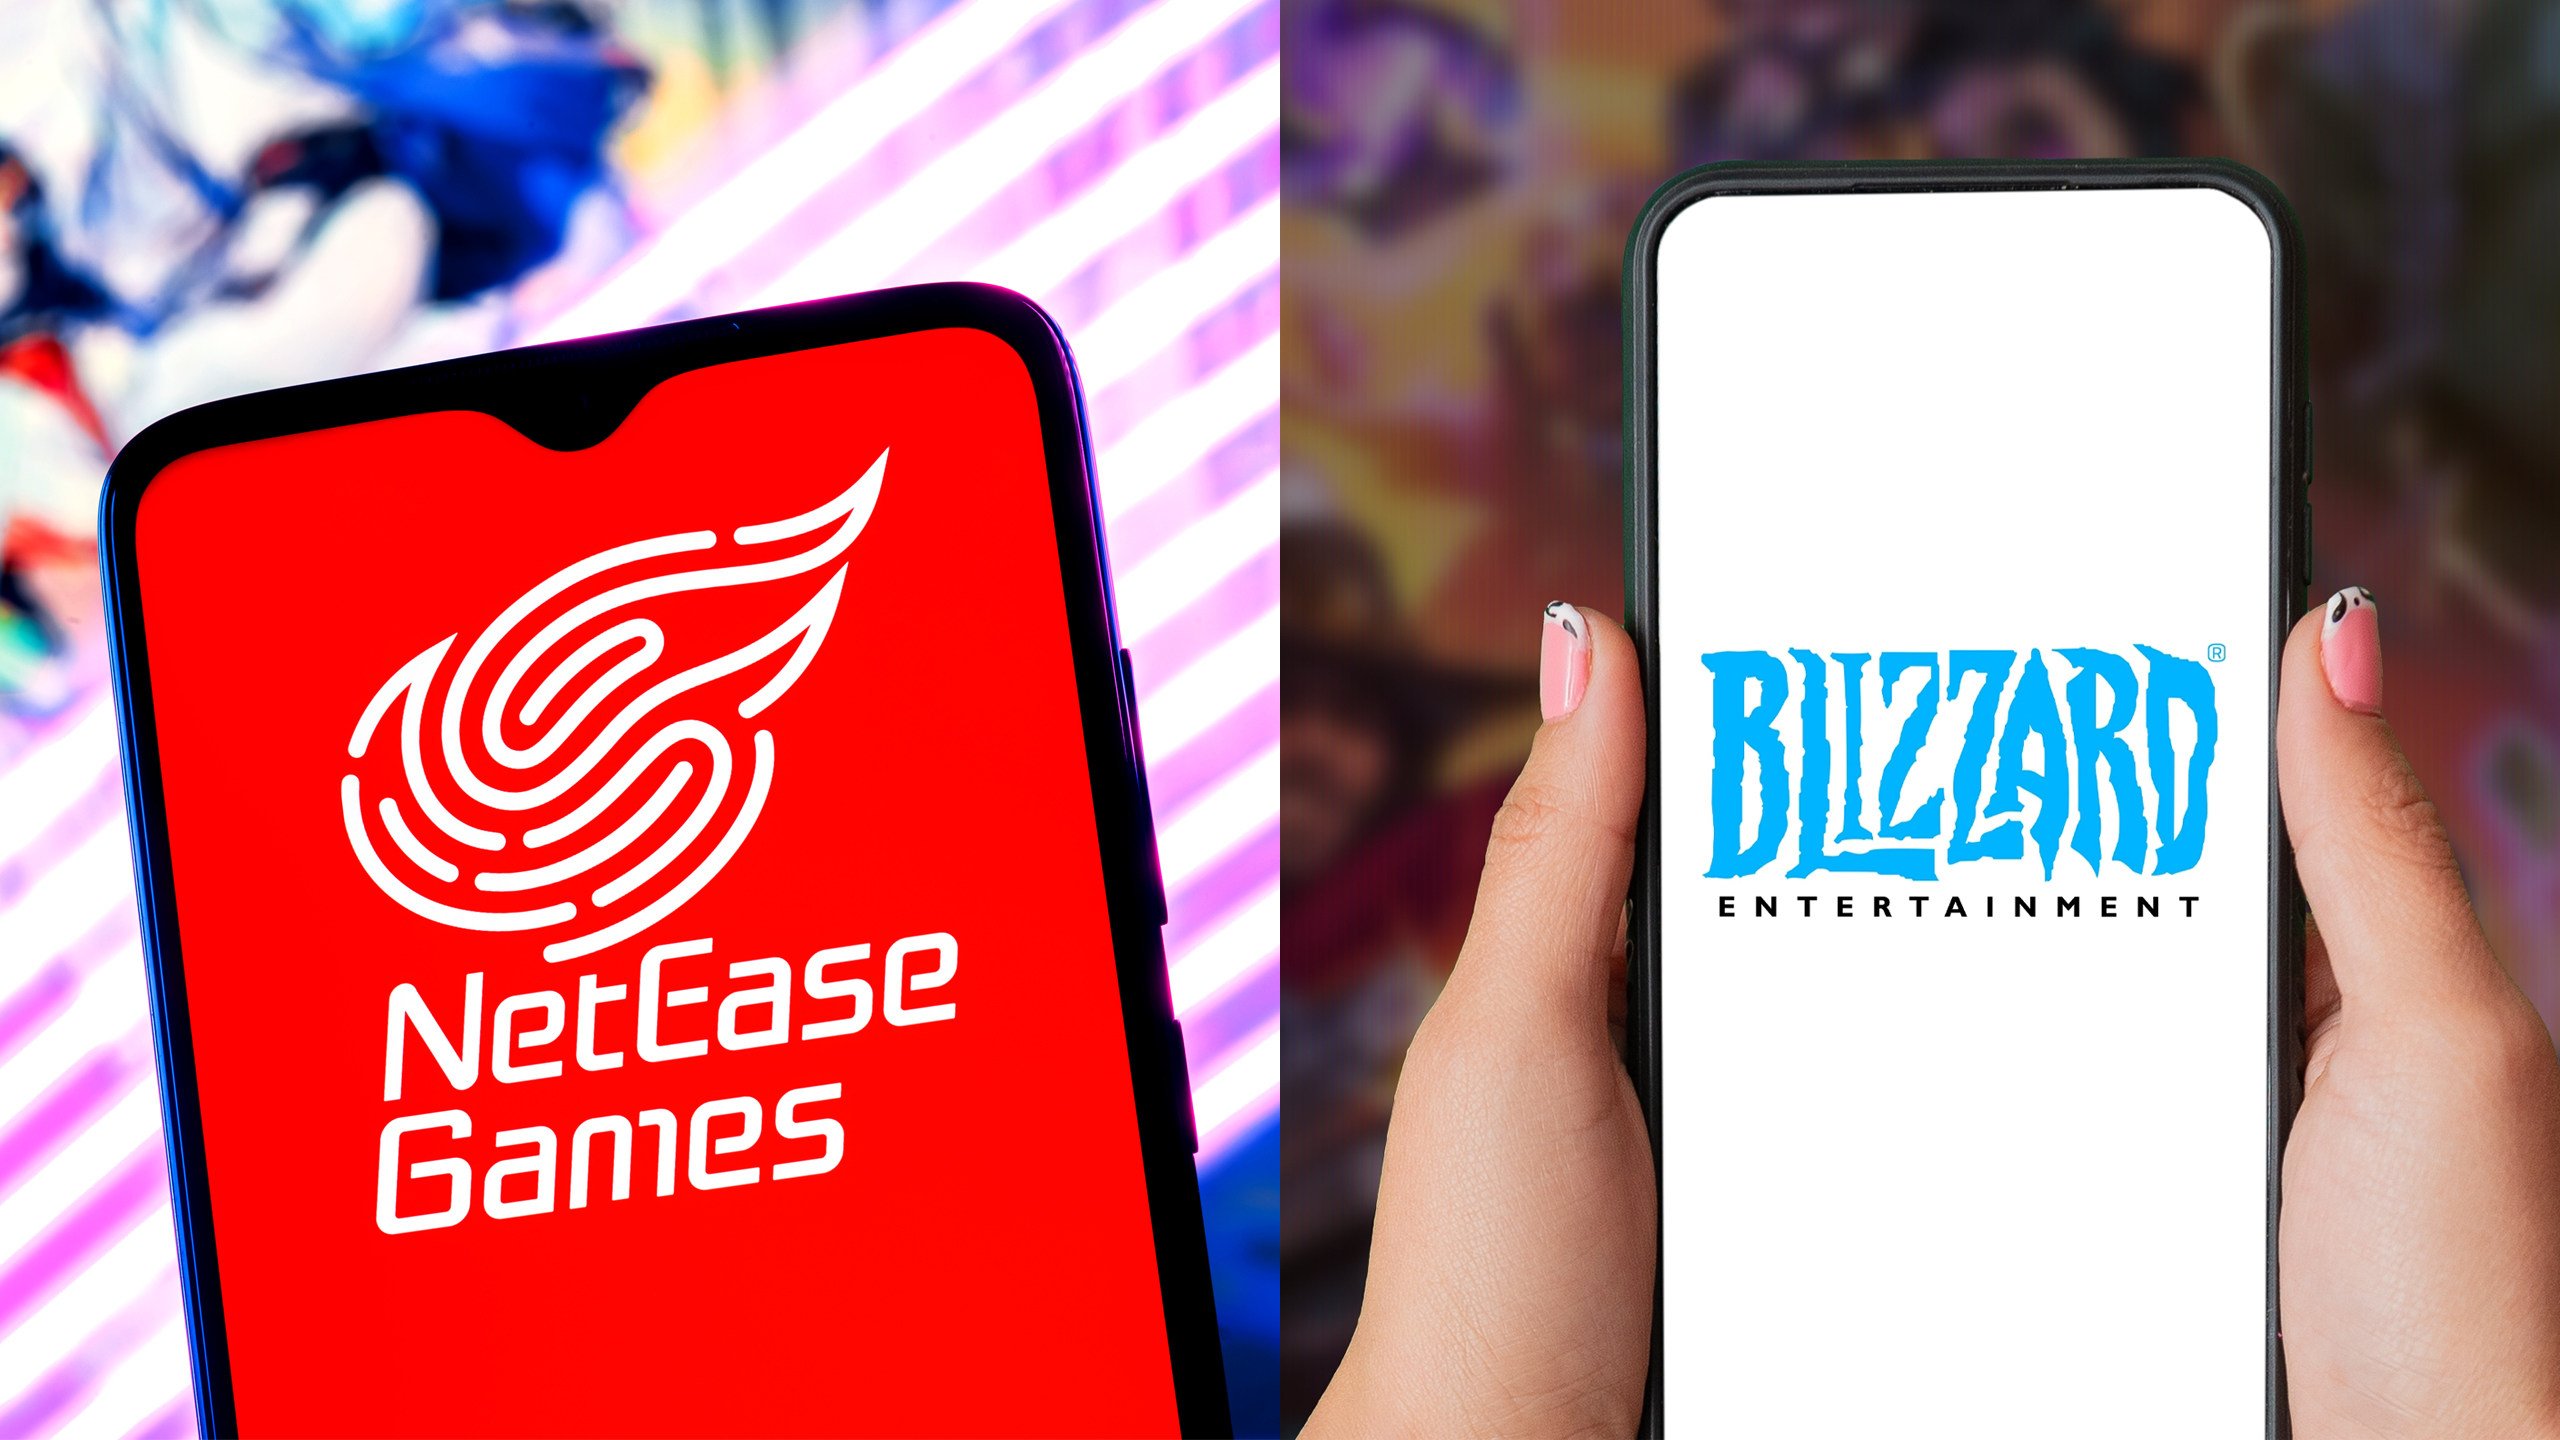 NetEase is a chinese company that produces internet technologies and video games. Beijing approved 104 new video games from mainland developers this month after fewer than 100 titles each were given the nod in April and May. Photo: Shutterstock Images